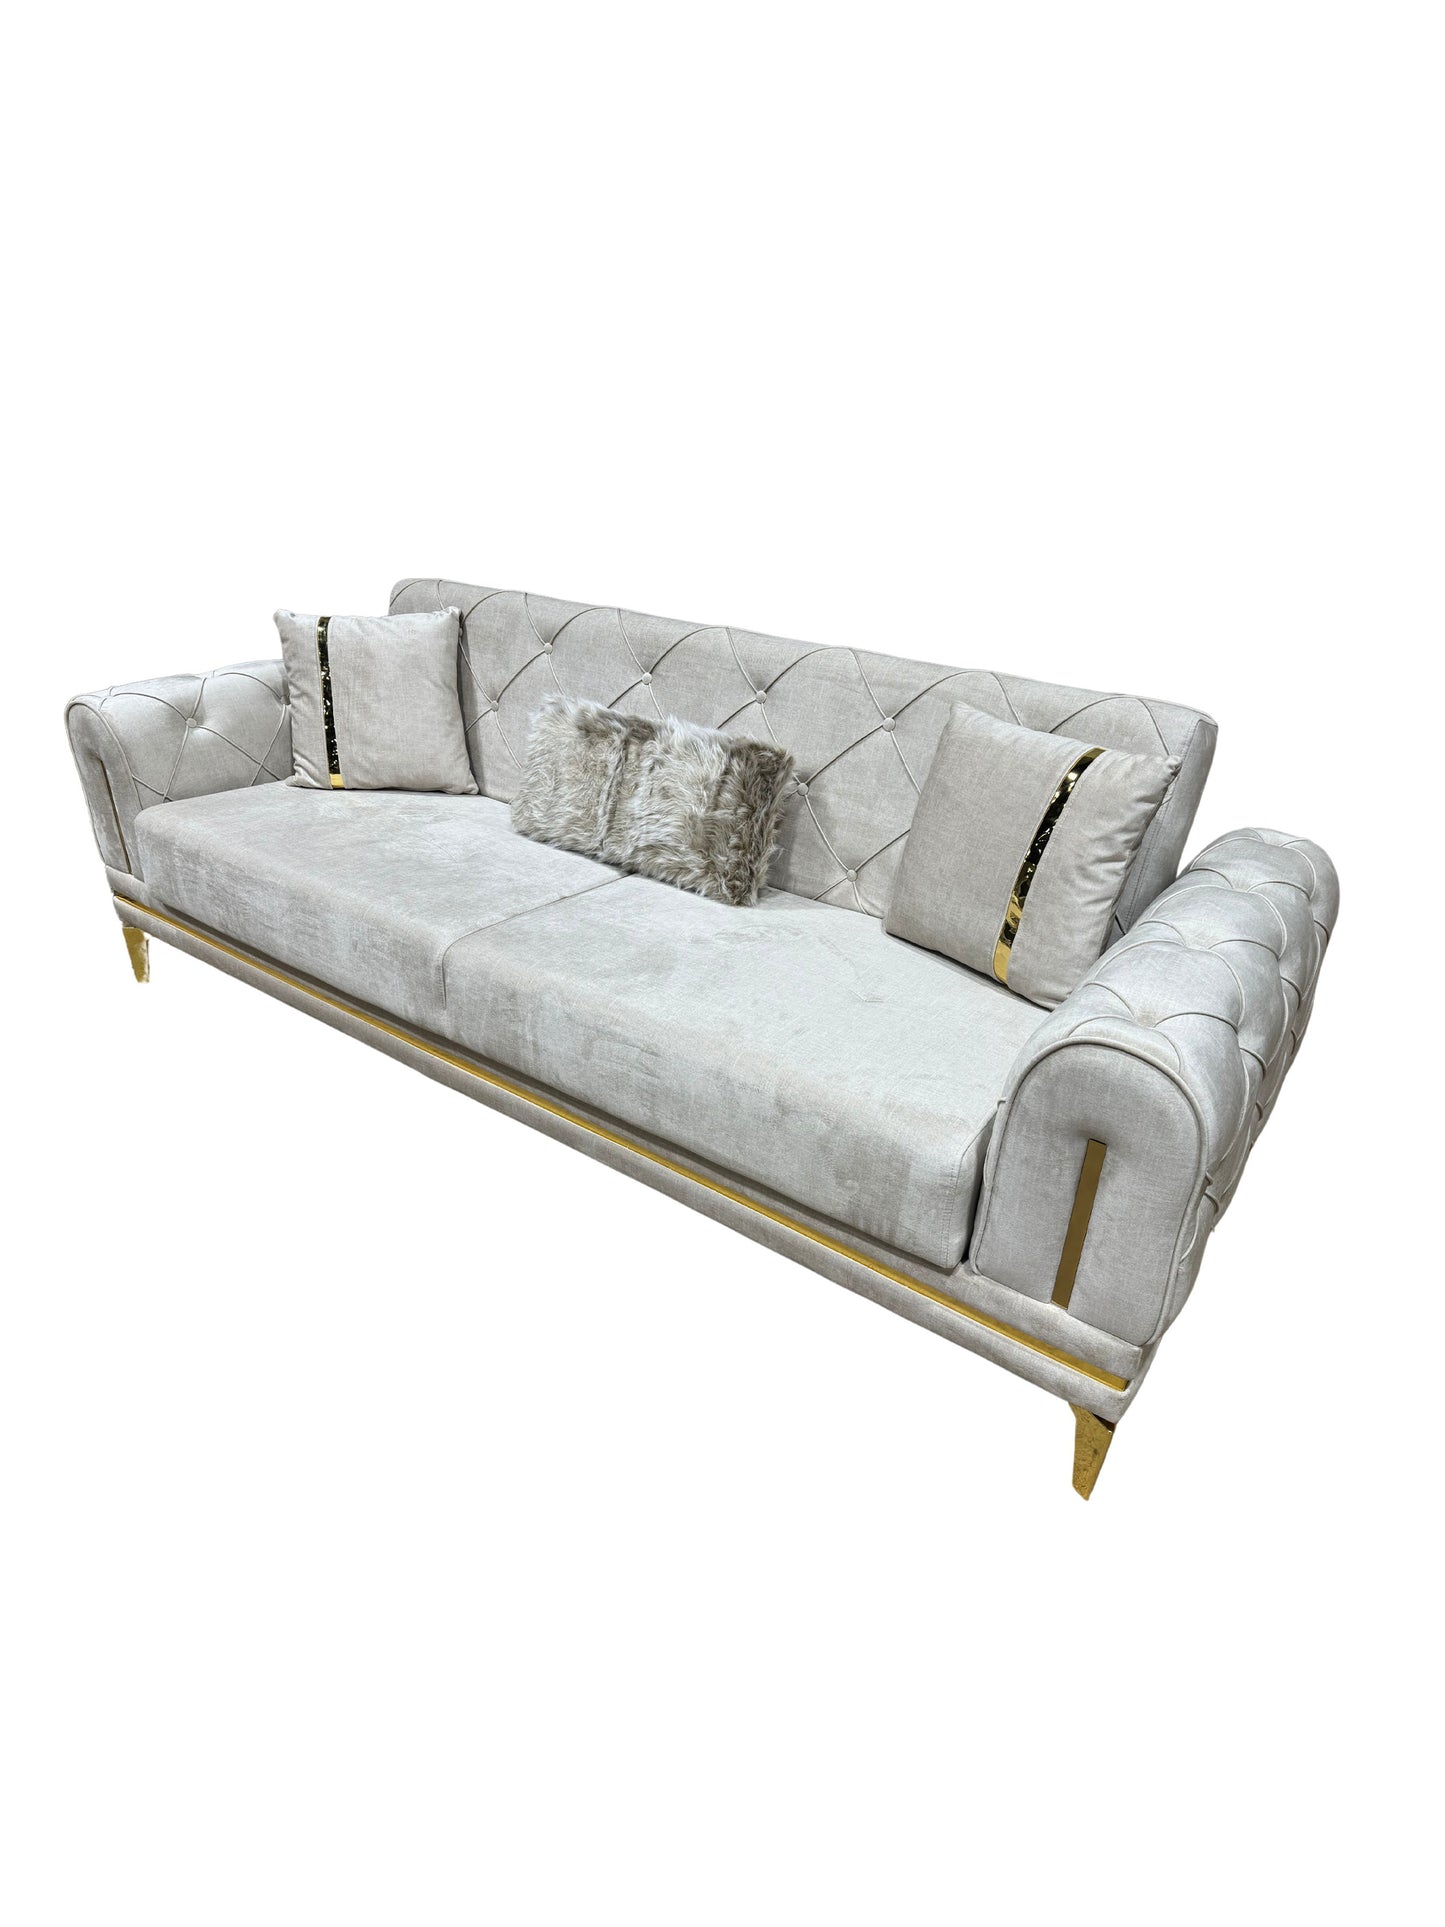 Eclectic Home Sofa Helena Off White 3 Seater